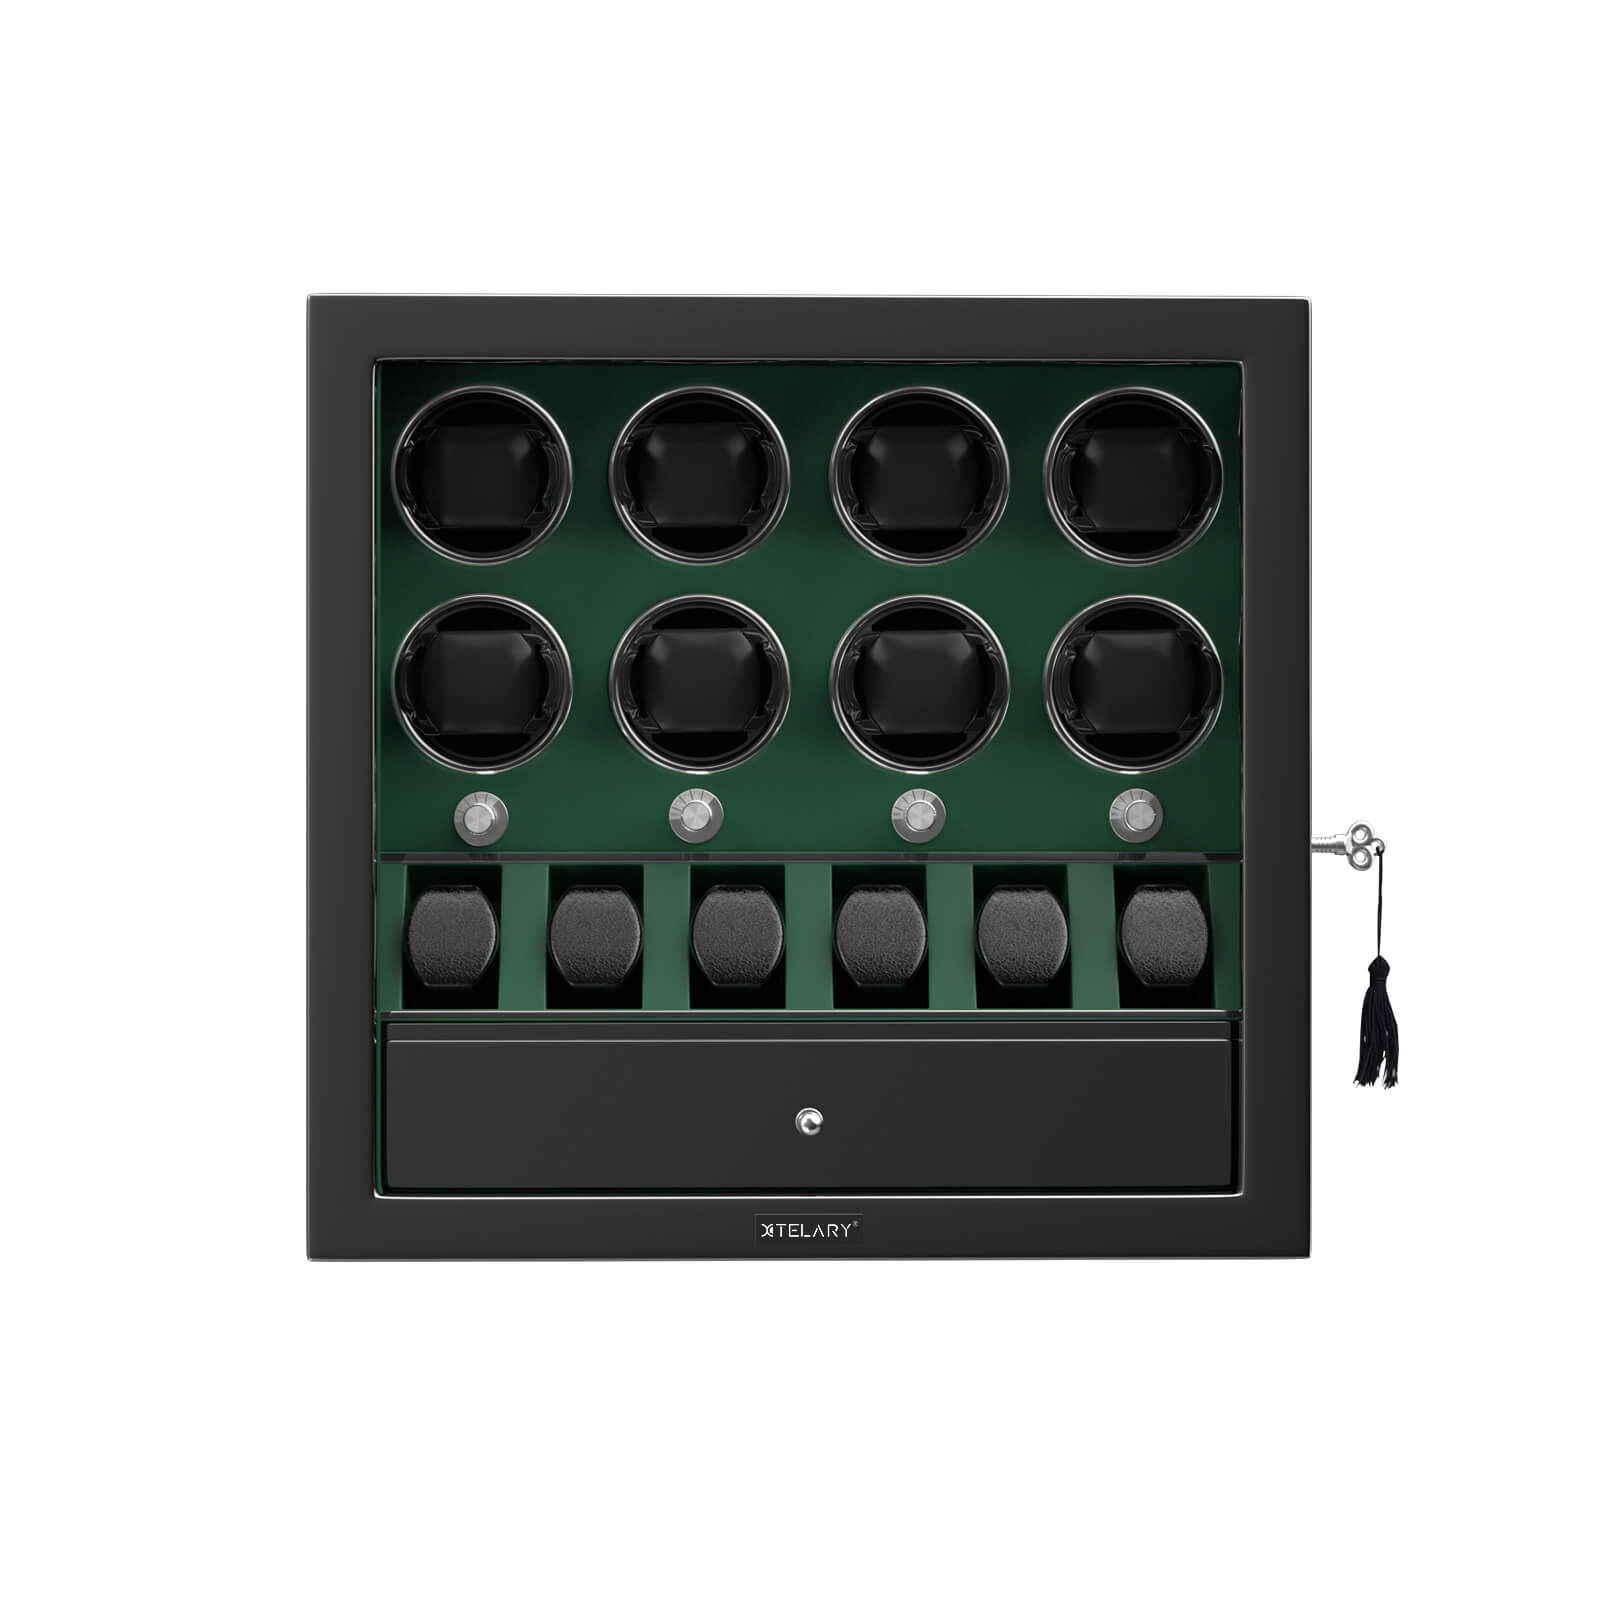 Compact 8 Watch Winders with 6 Watches Organizer Storage Large Space Case - Green